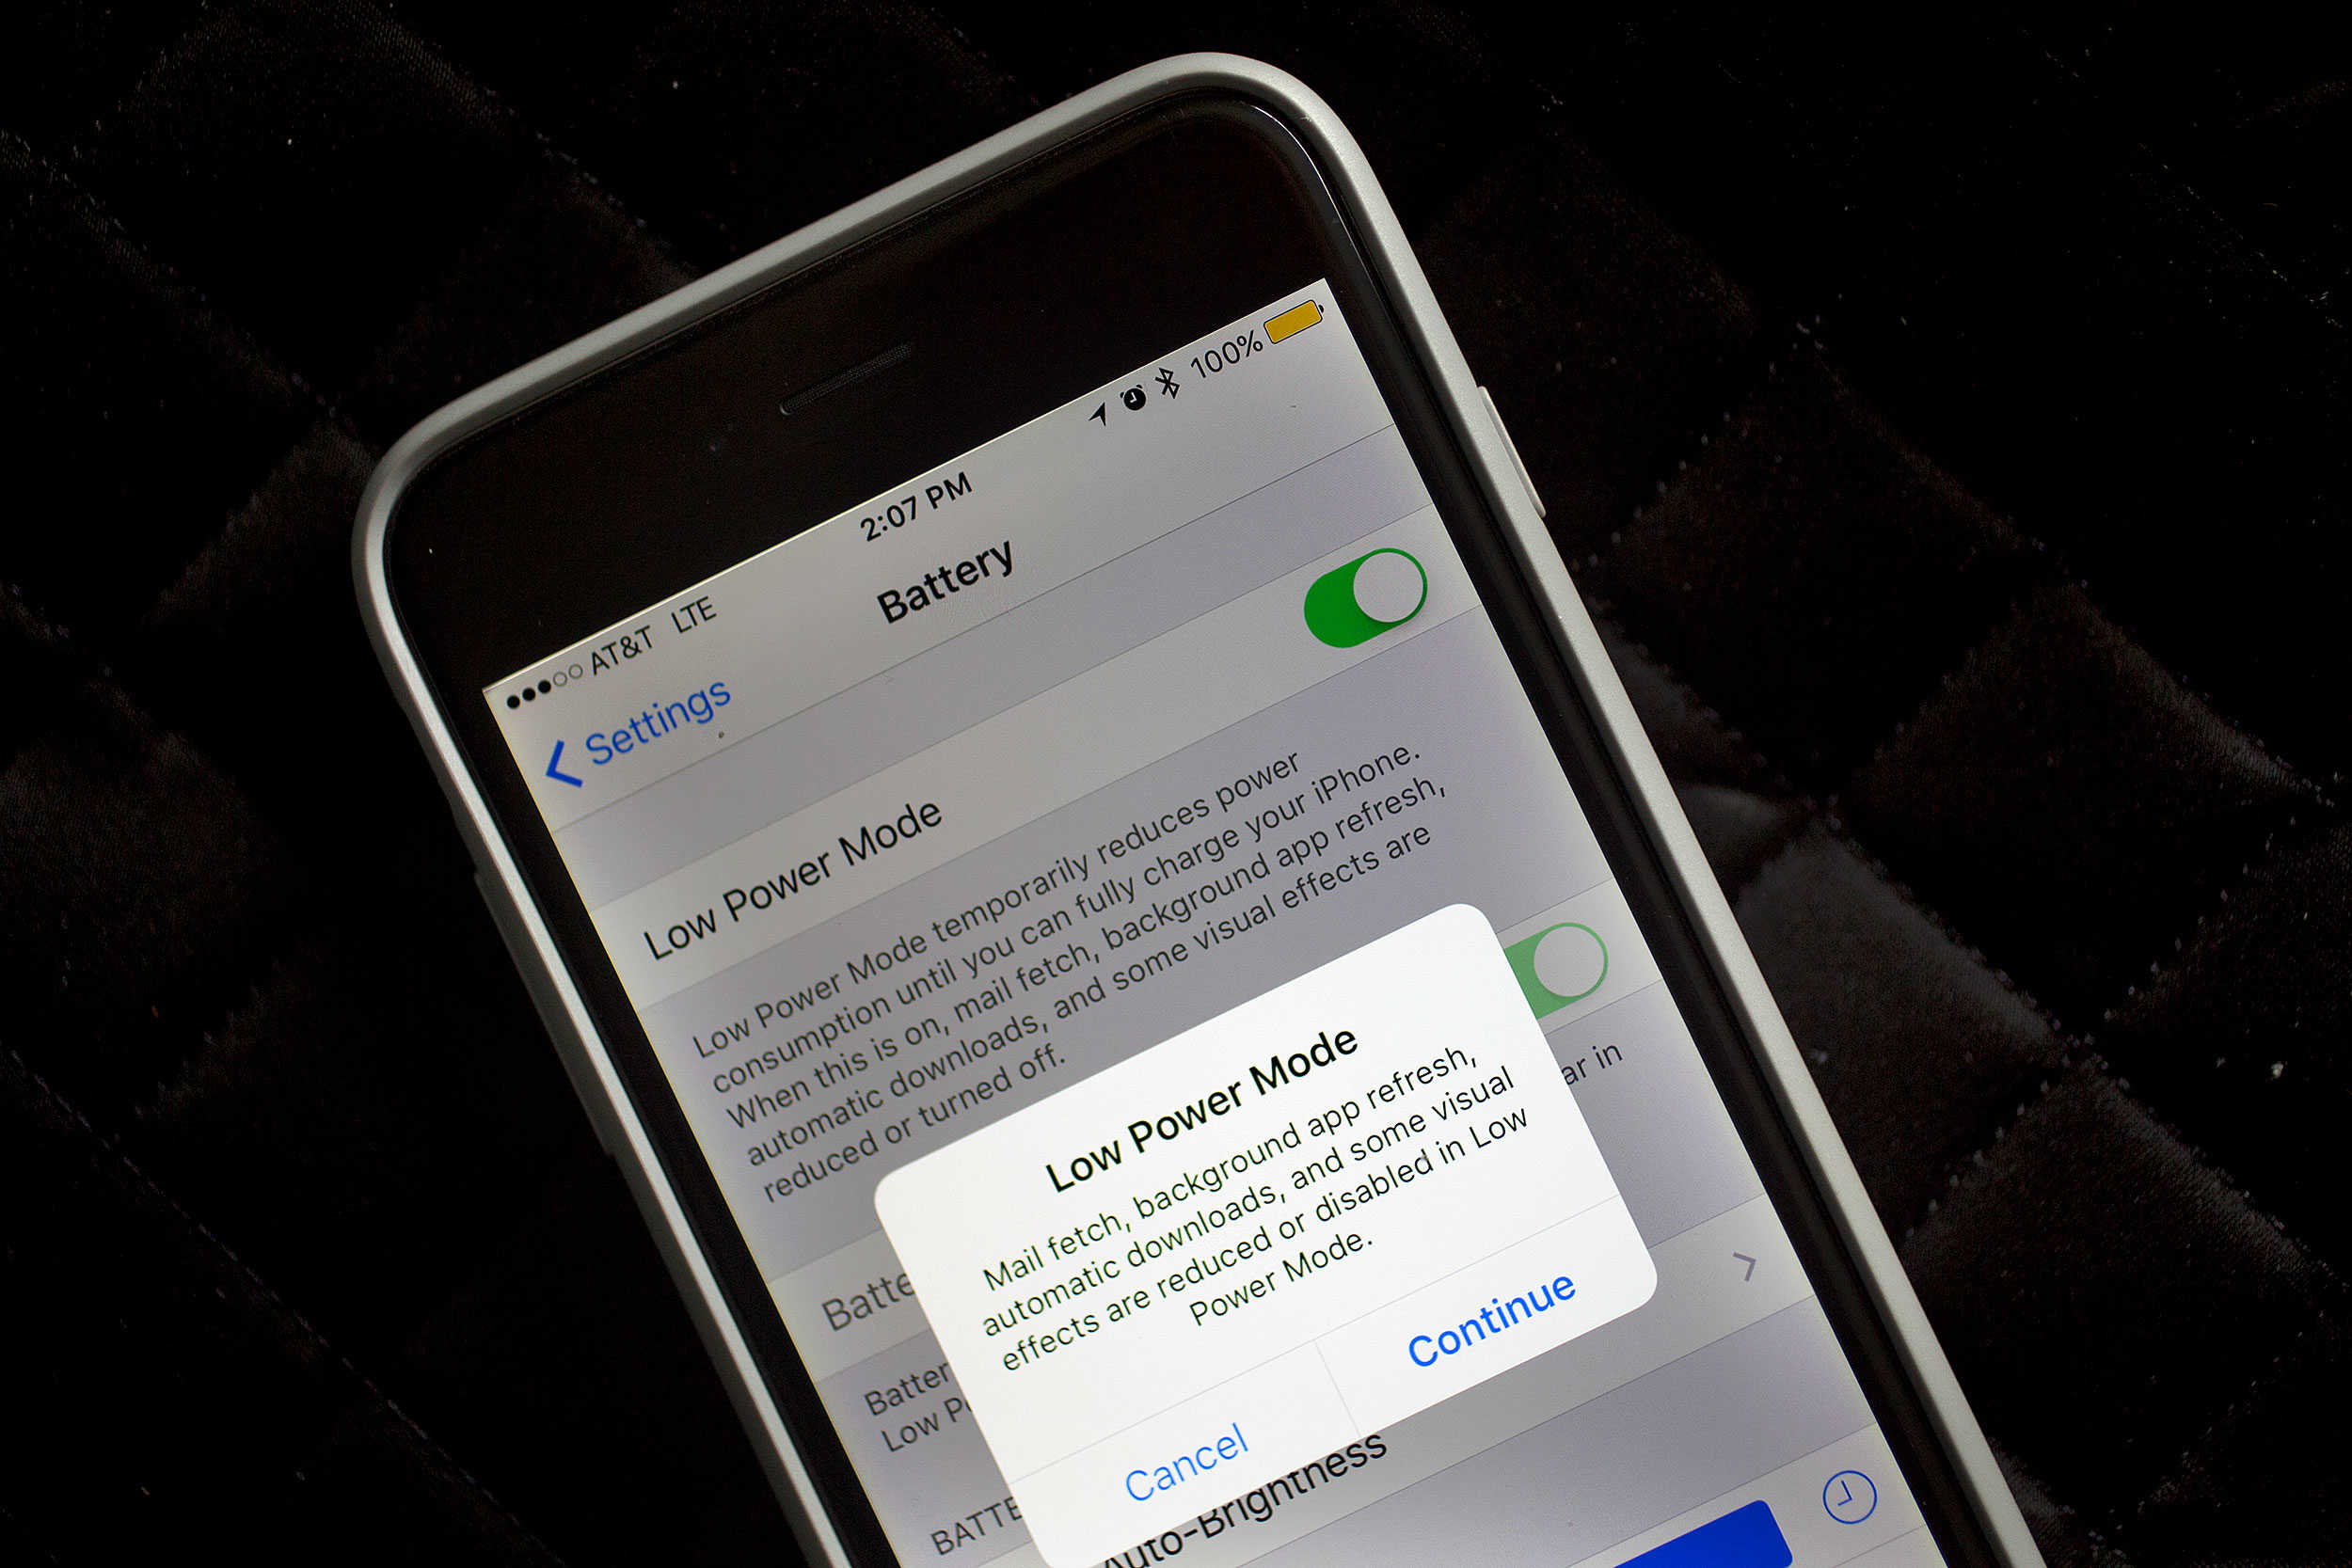 The new Low Battery Mode in iOS 9 means your device will last even longer than before.